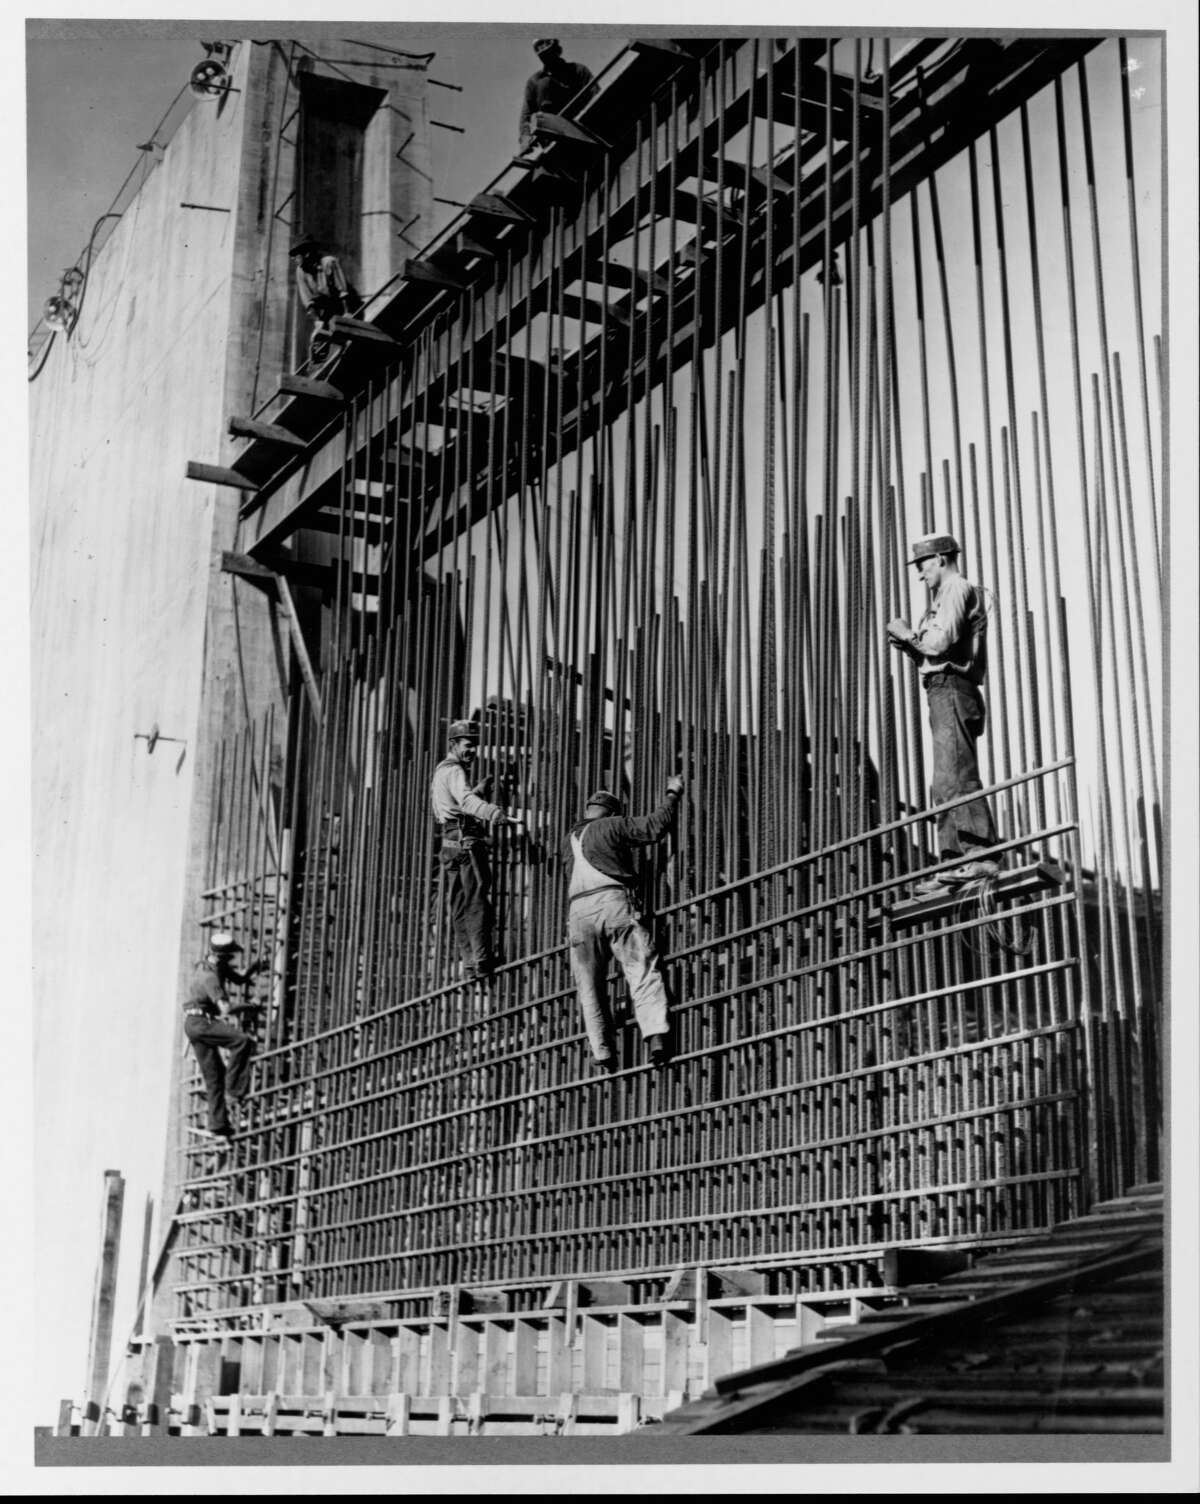 Construction workers build the steel rod frame of a wall in Grand Coulee Dam. November, 1937. (Photo by Library of Congress/Corbis/VCG via Getty Images)